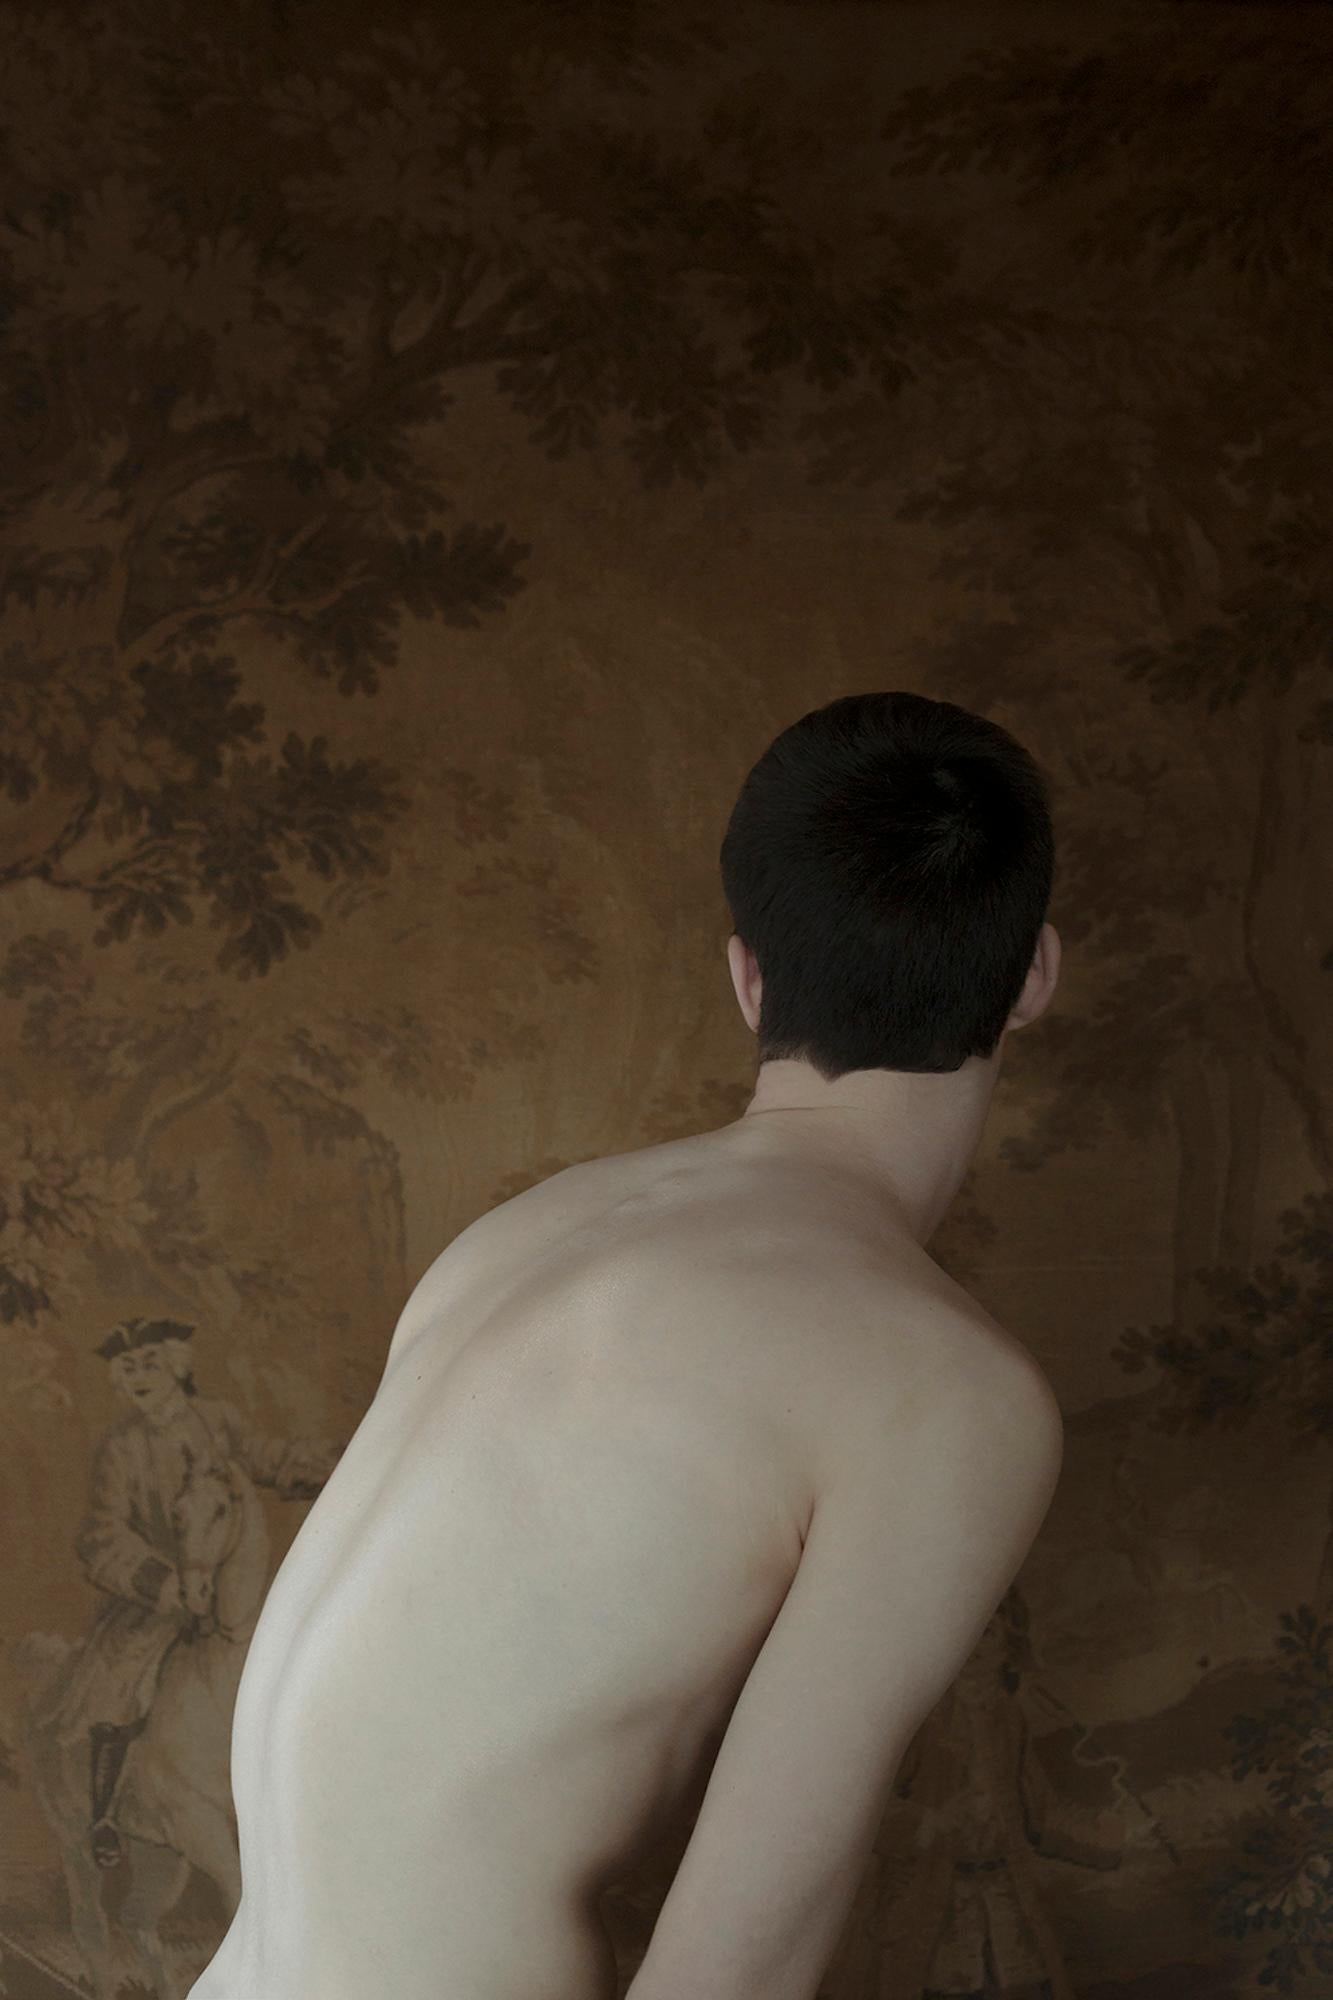 Him by Camille Brasselet - Nude art photography, male body, brown background